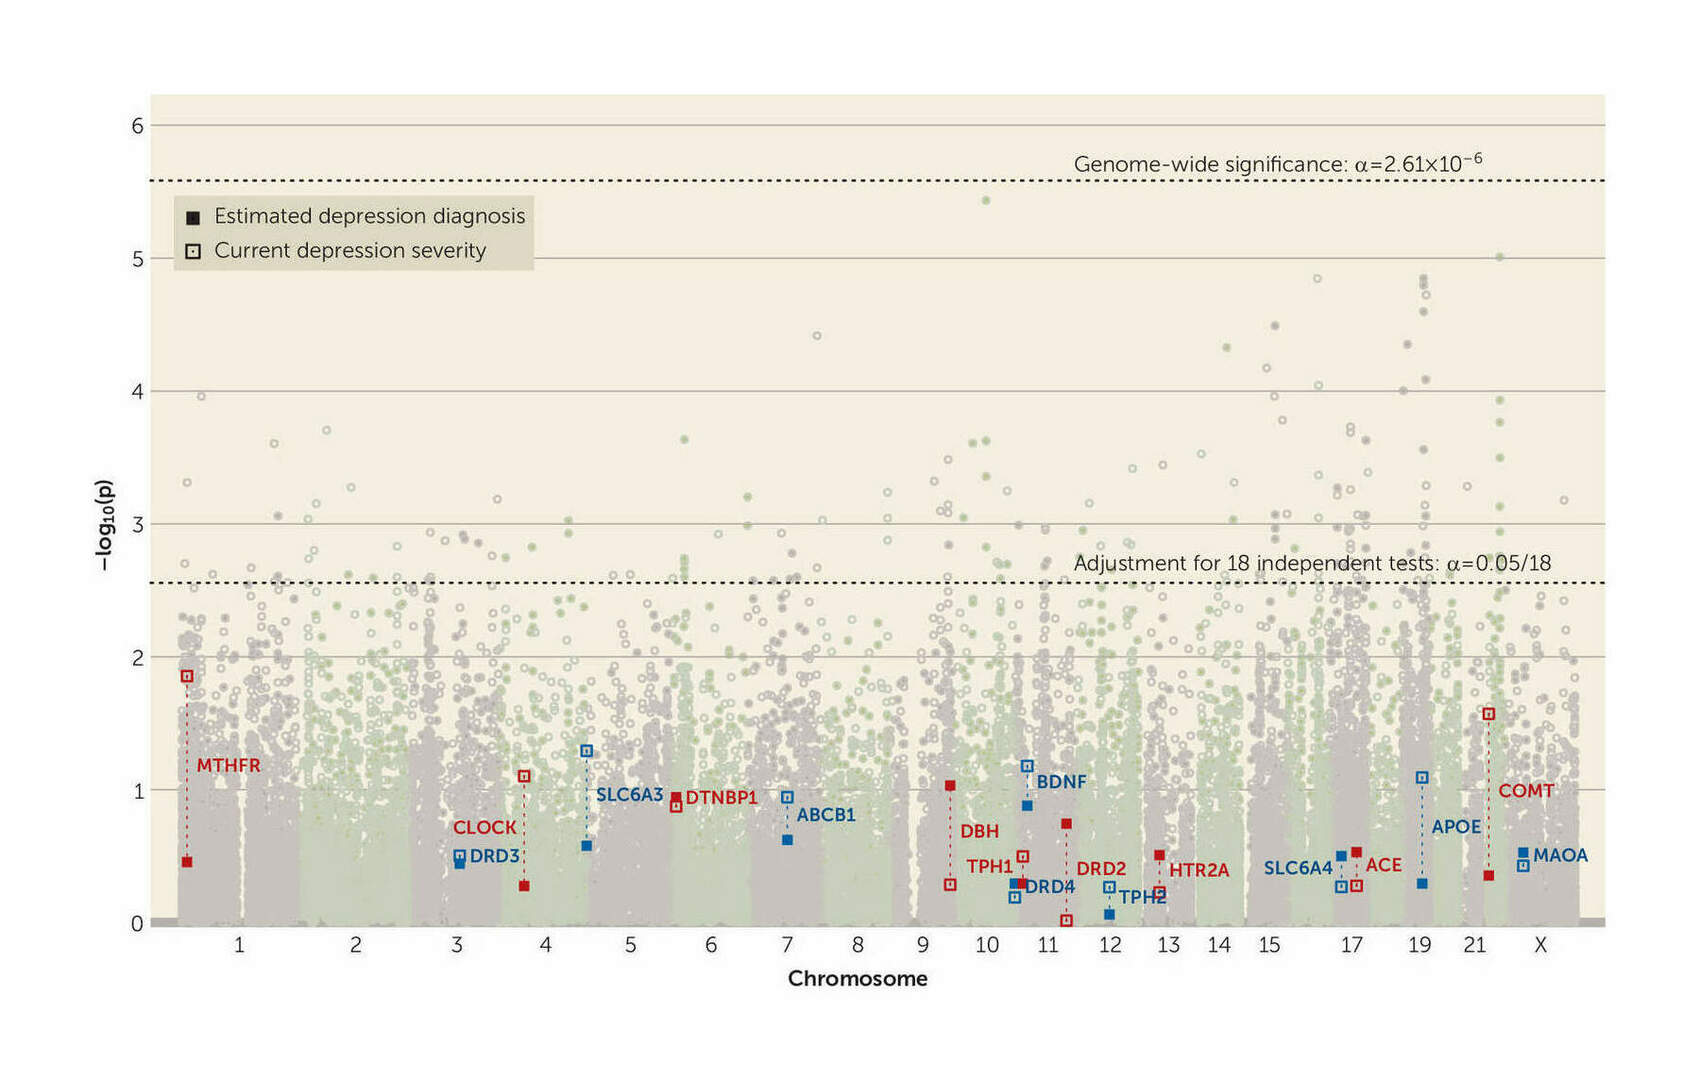 Figure 3: Gene-wise statistics for effects of 18 candidate genes on primary depression outcomes in the UK Biobank sample. The plot shows gene-wise p values across the genome, highlighting the 18 candidate polymorphisms’ effects on estimated depression diagnosis (filled points) and past-2-week depression symptom severity (unfilled points) from the online mental health follow-up assessment in the UK Biobank sample (N = 115,257). Gene labels alternate colors to aid readability. Detailed descriptions of the variables and of the association models are provided in sections S3 and S4.2, respectively, of the online supplement.